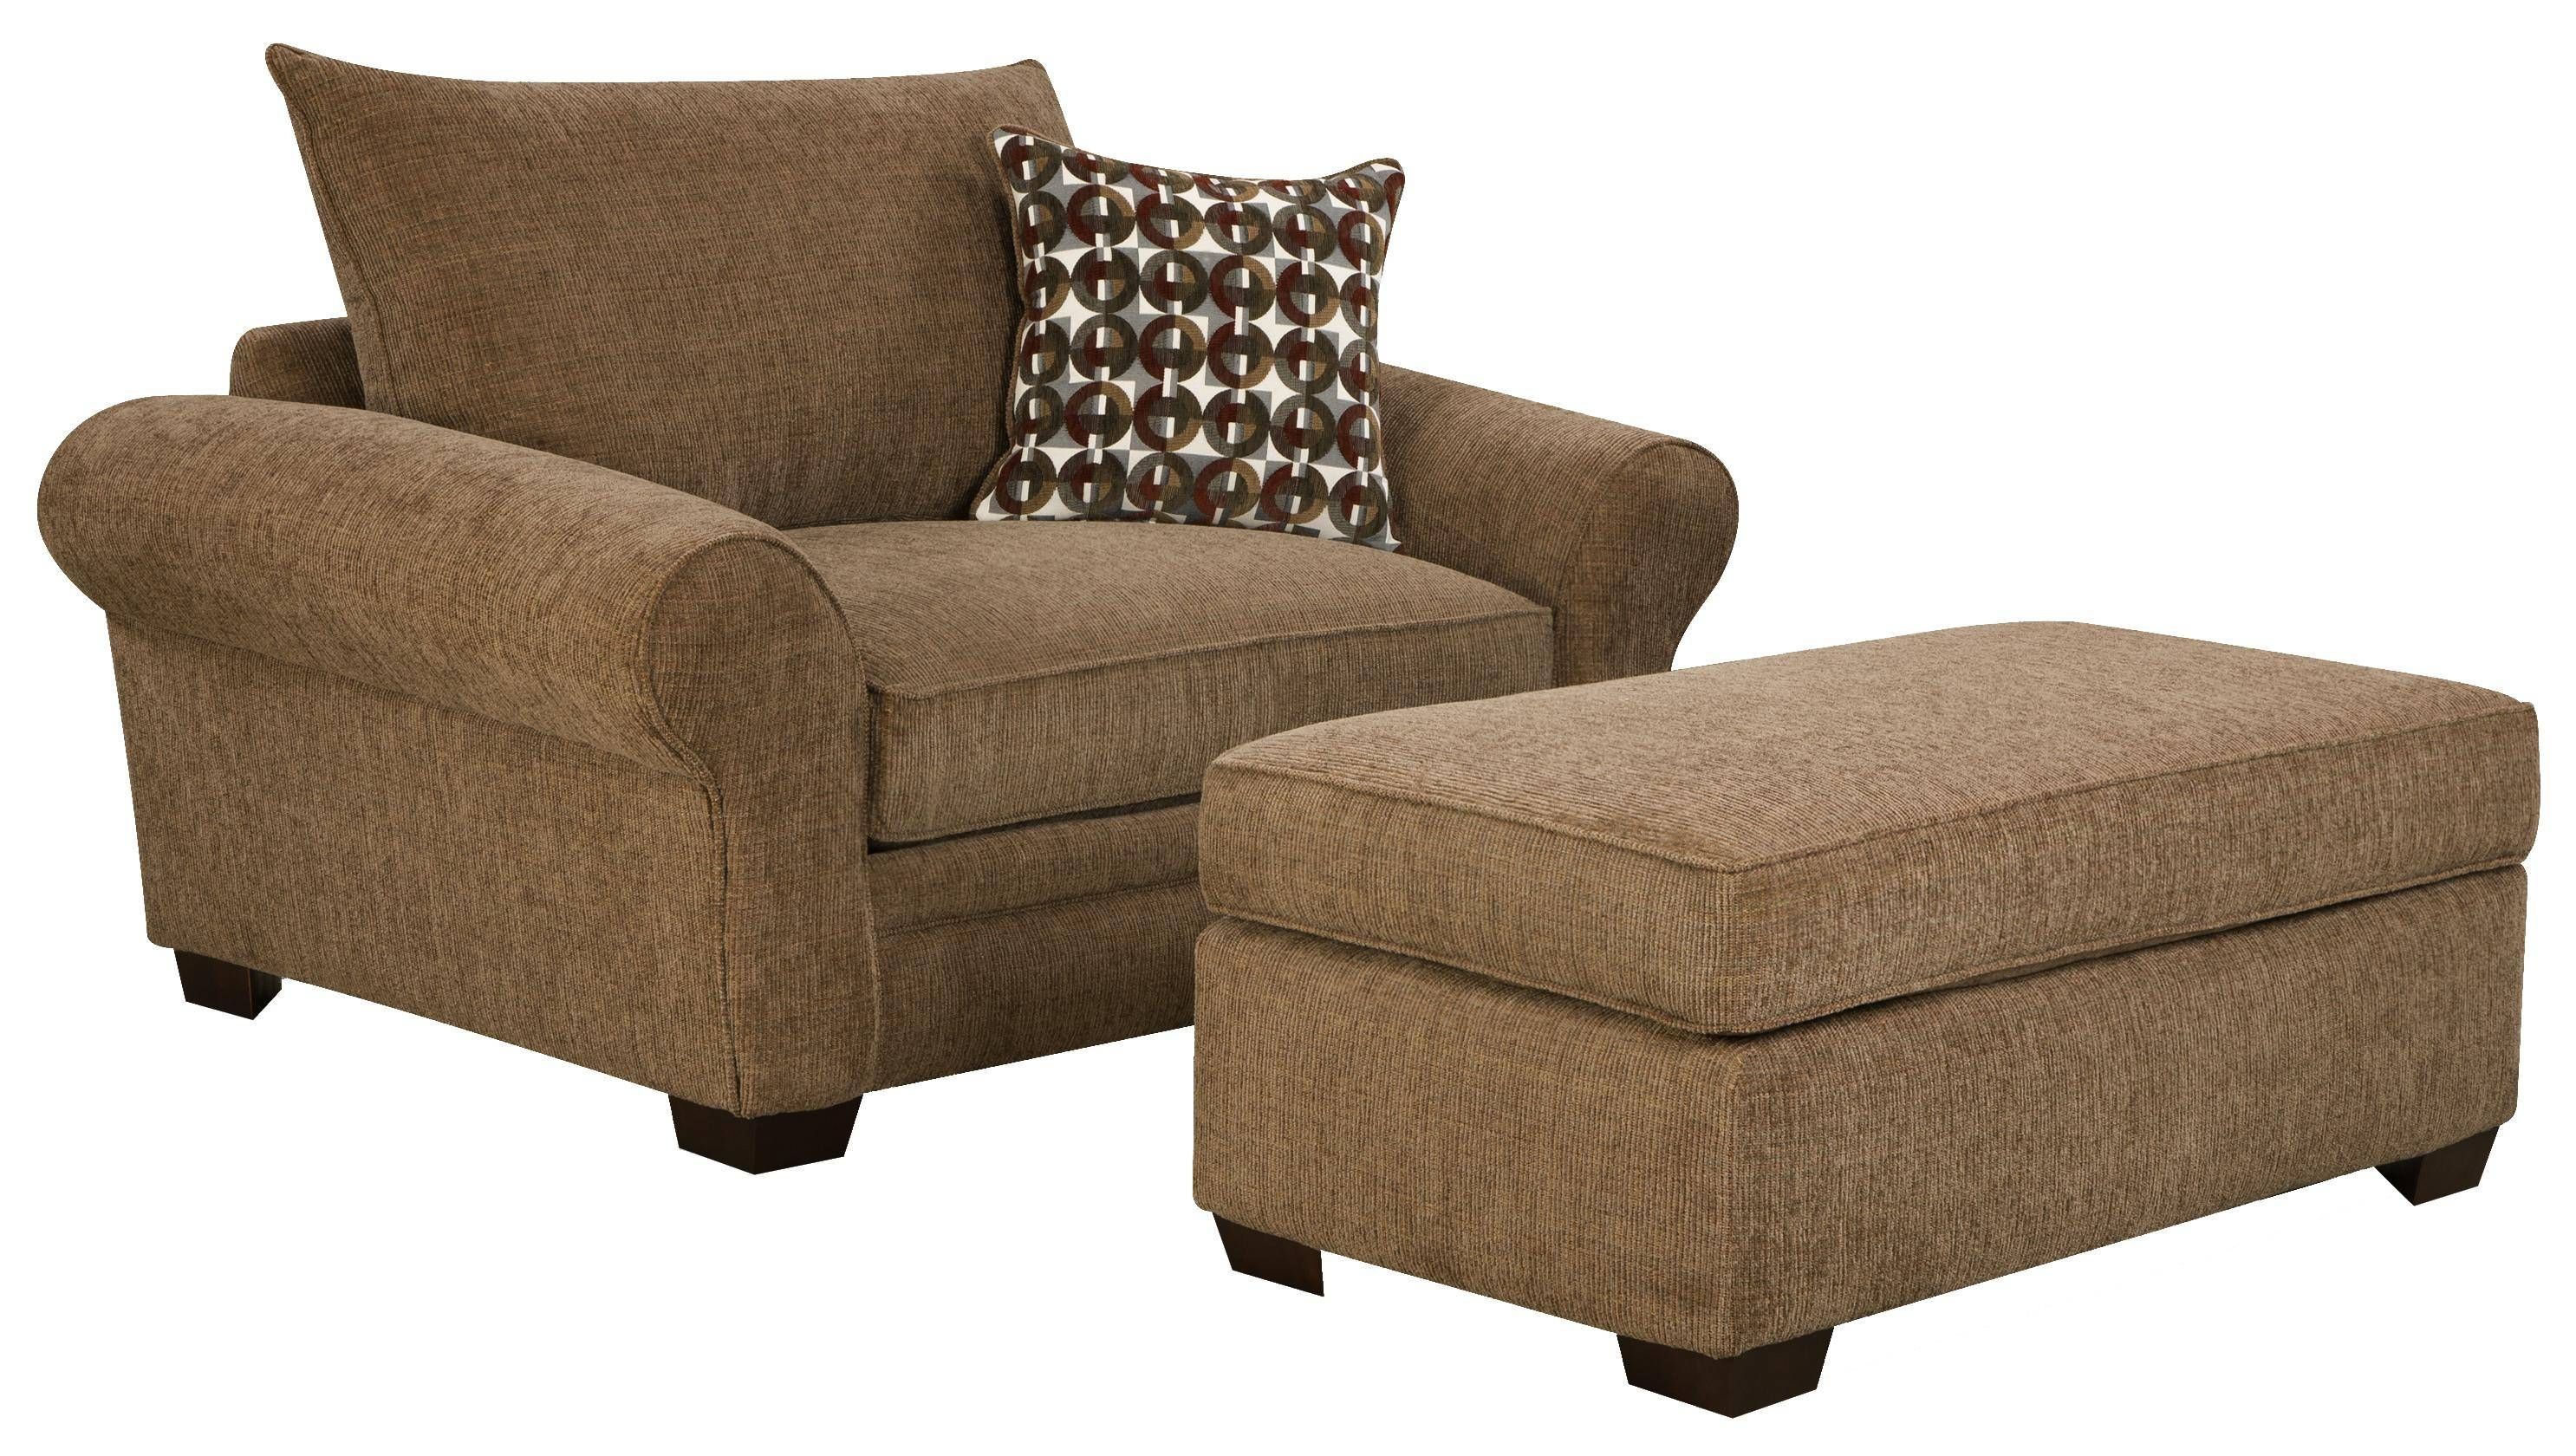 Chairs With Ottomans For Living Room Living Room Design And Living Within Sofa Chair With Ottoman (View 2 of 30)